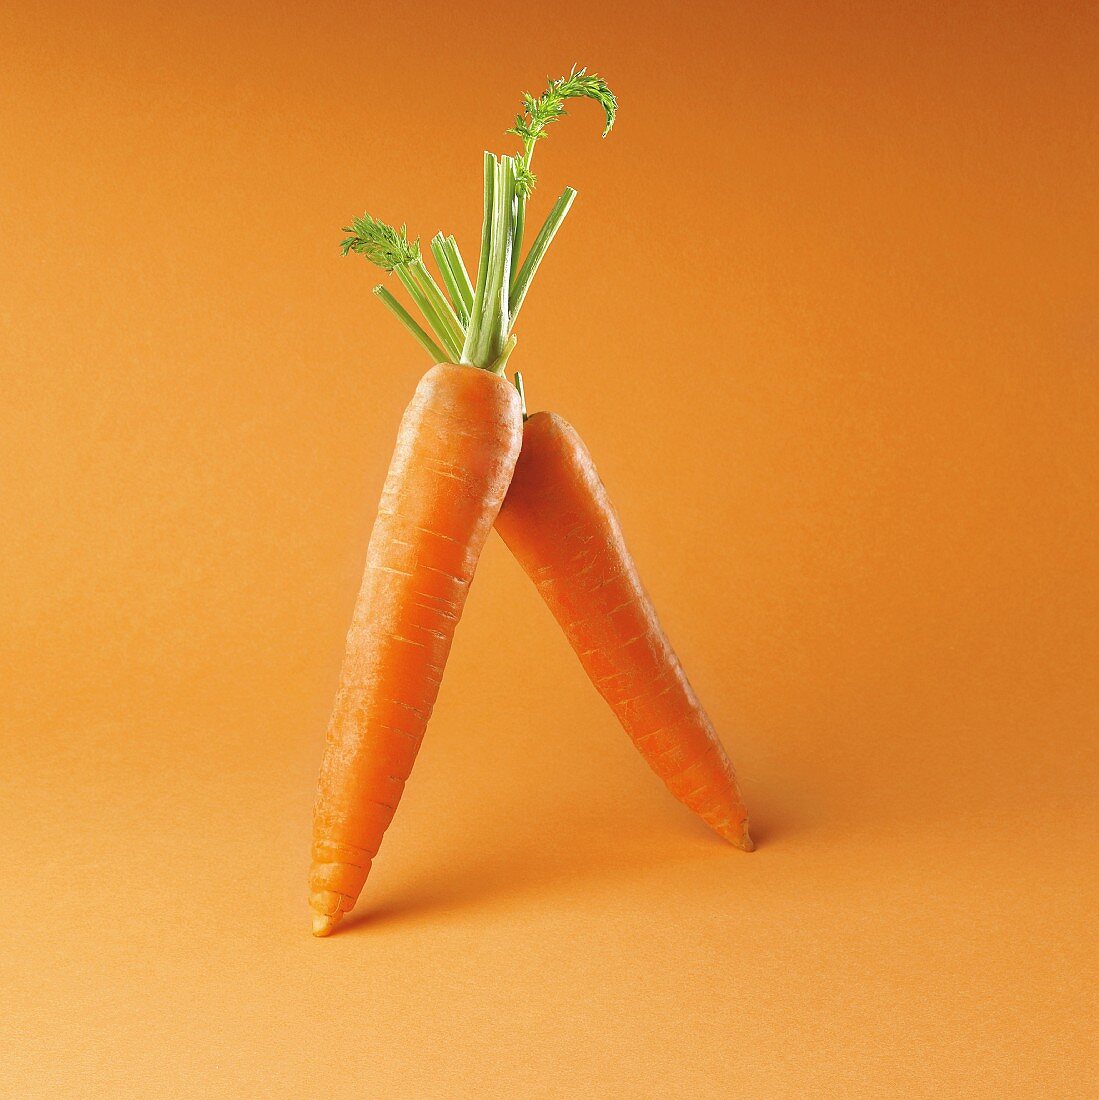 Two carrots